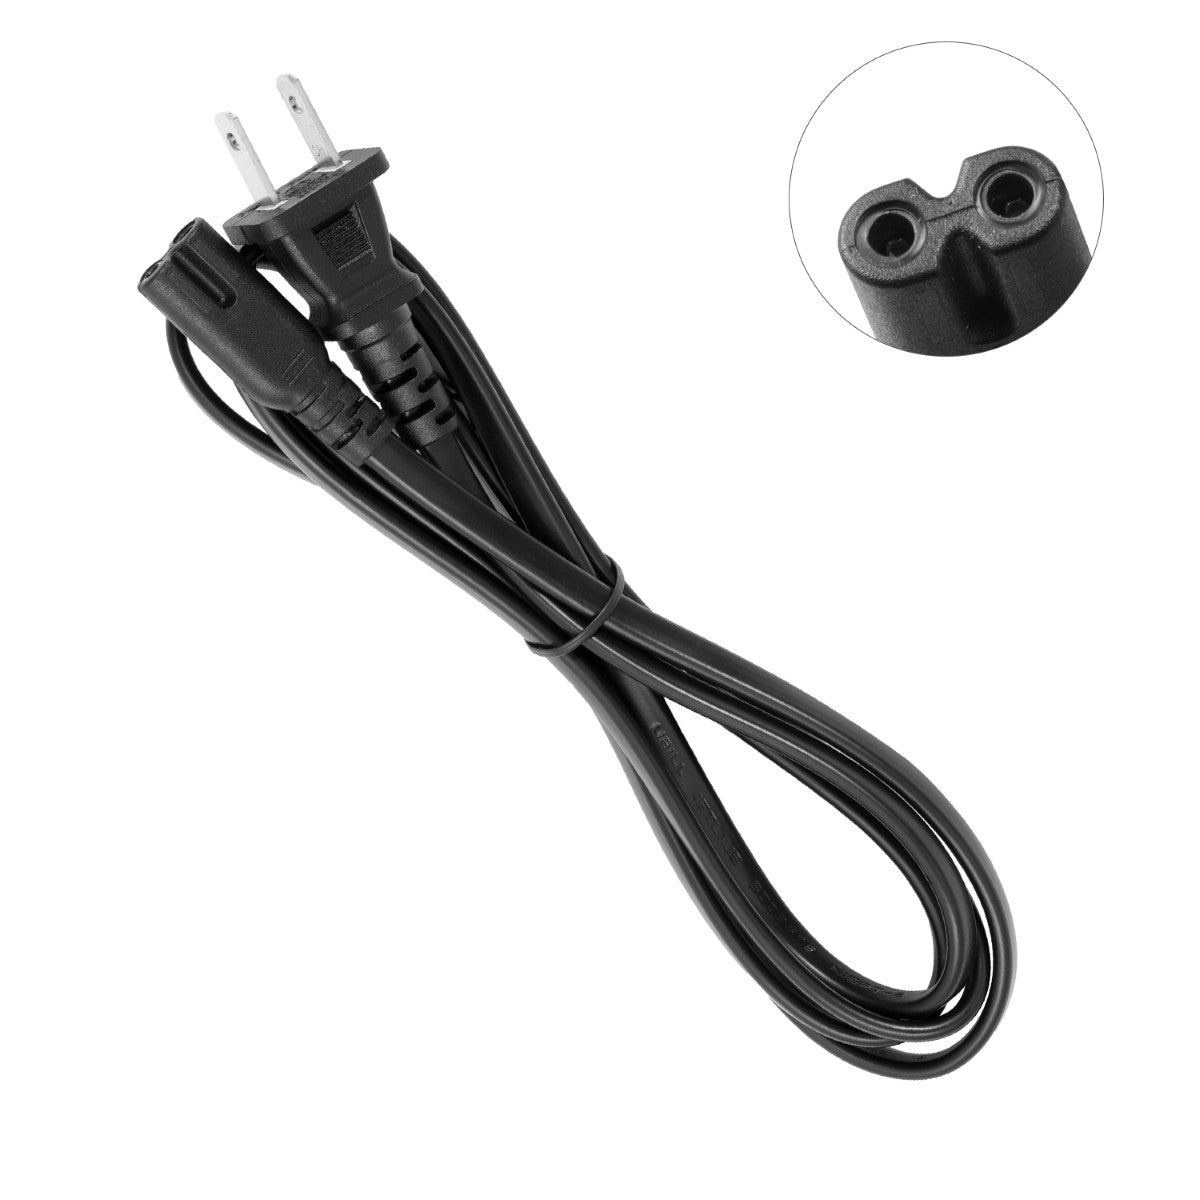 Power Cable for HP ENVY Photo 7858 All-in-One Printer.